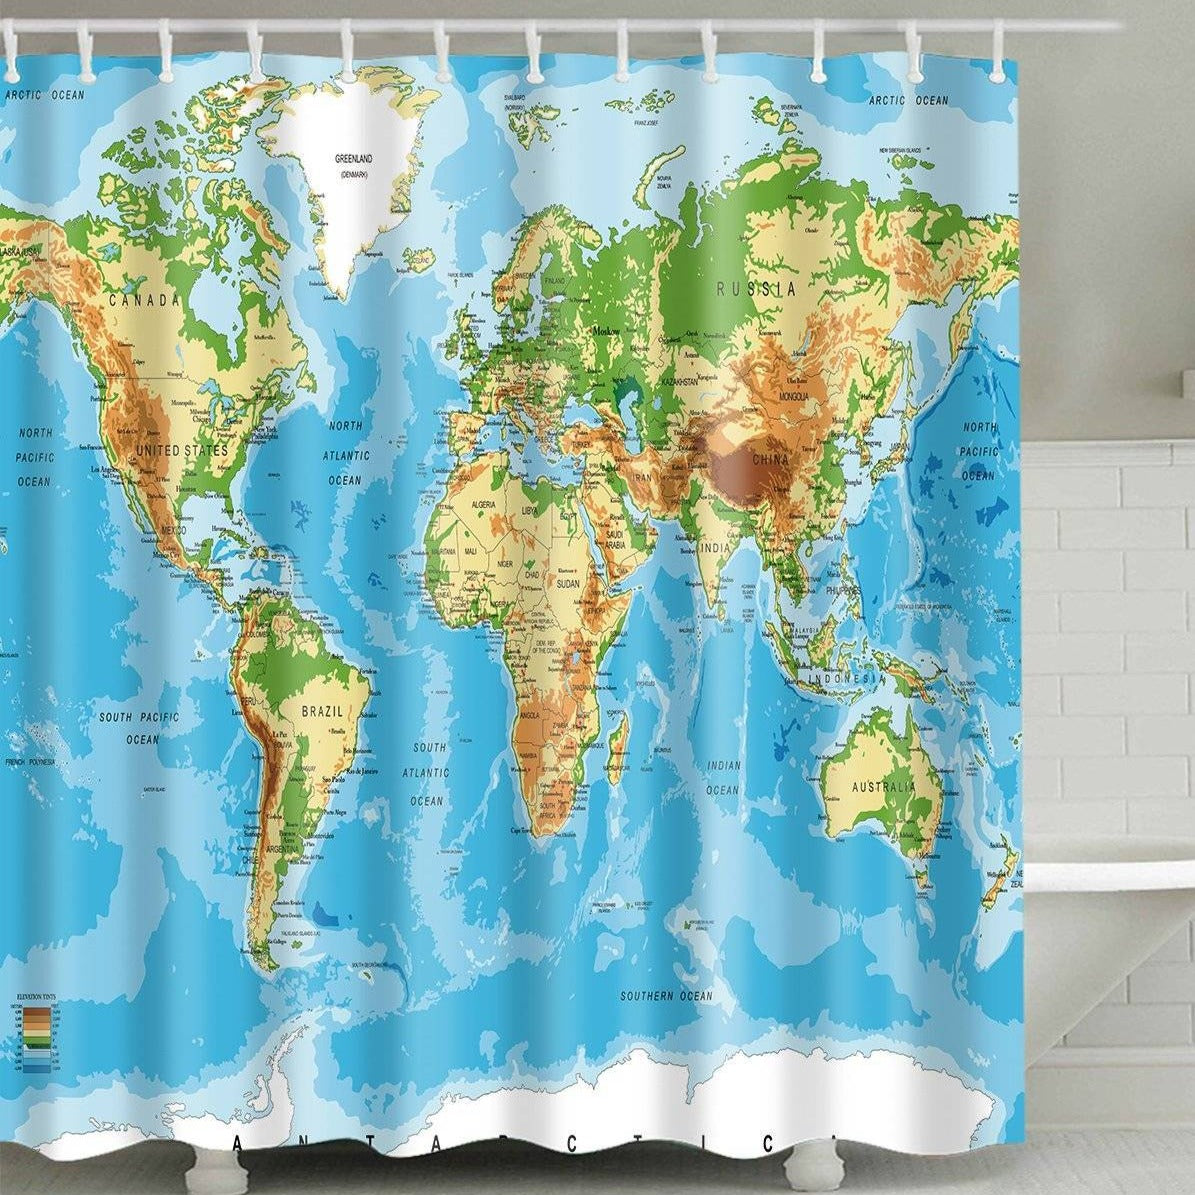 Colorful Countries Geography Educational World Map Shower Curtain